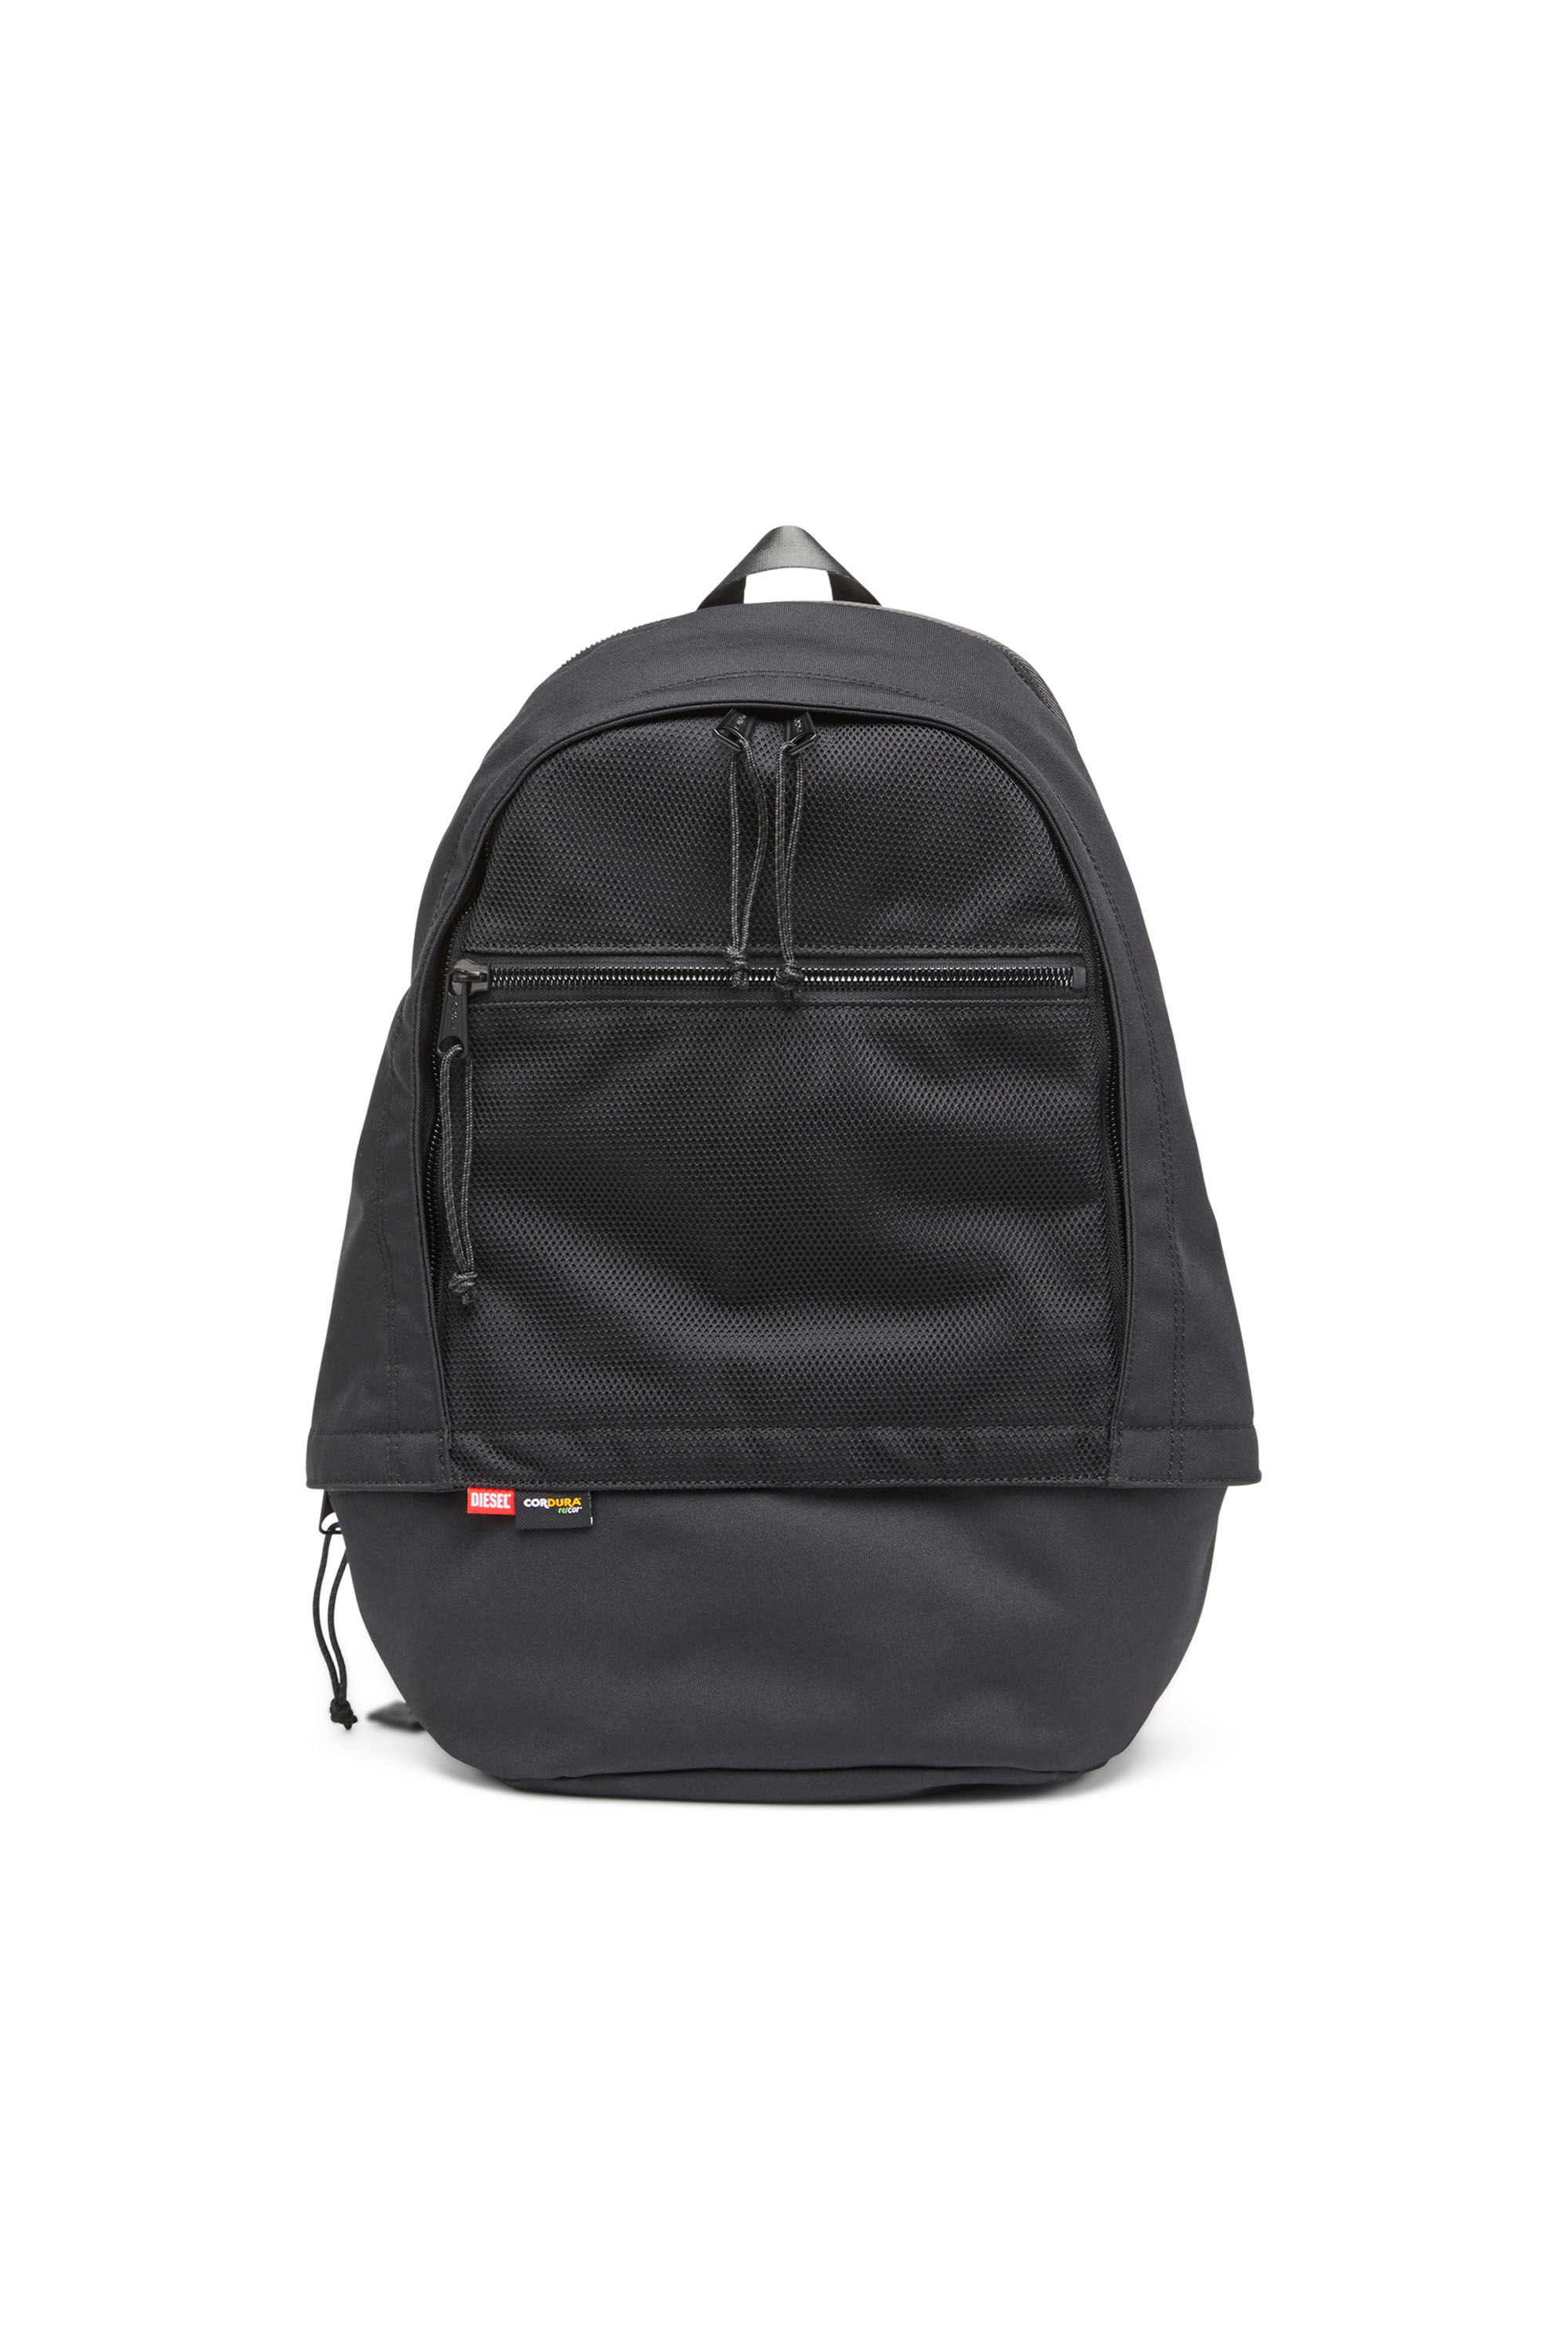 【WEXLEY】 BACKPACK　ブラック 17L